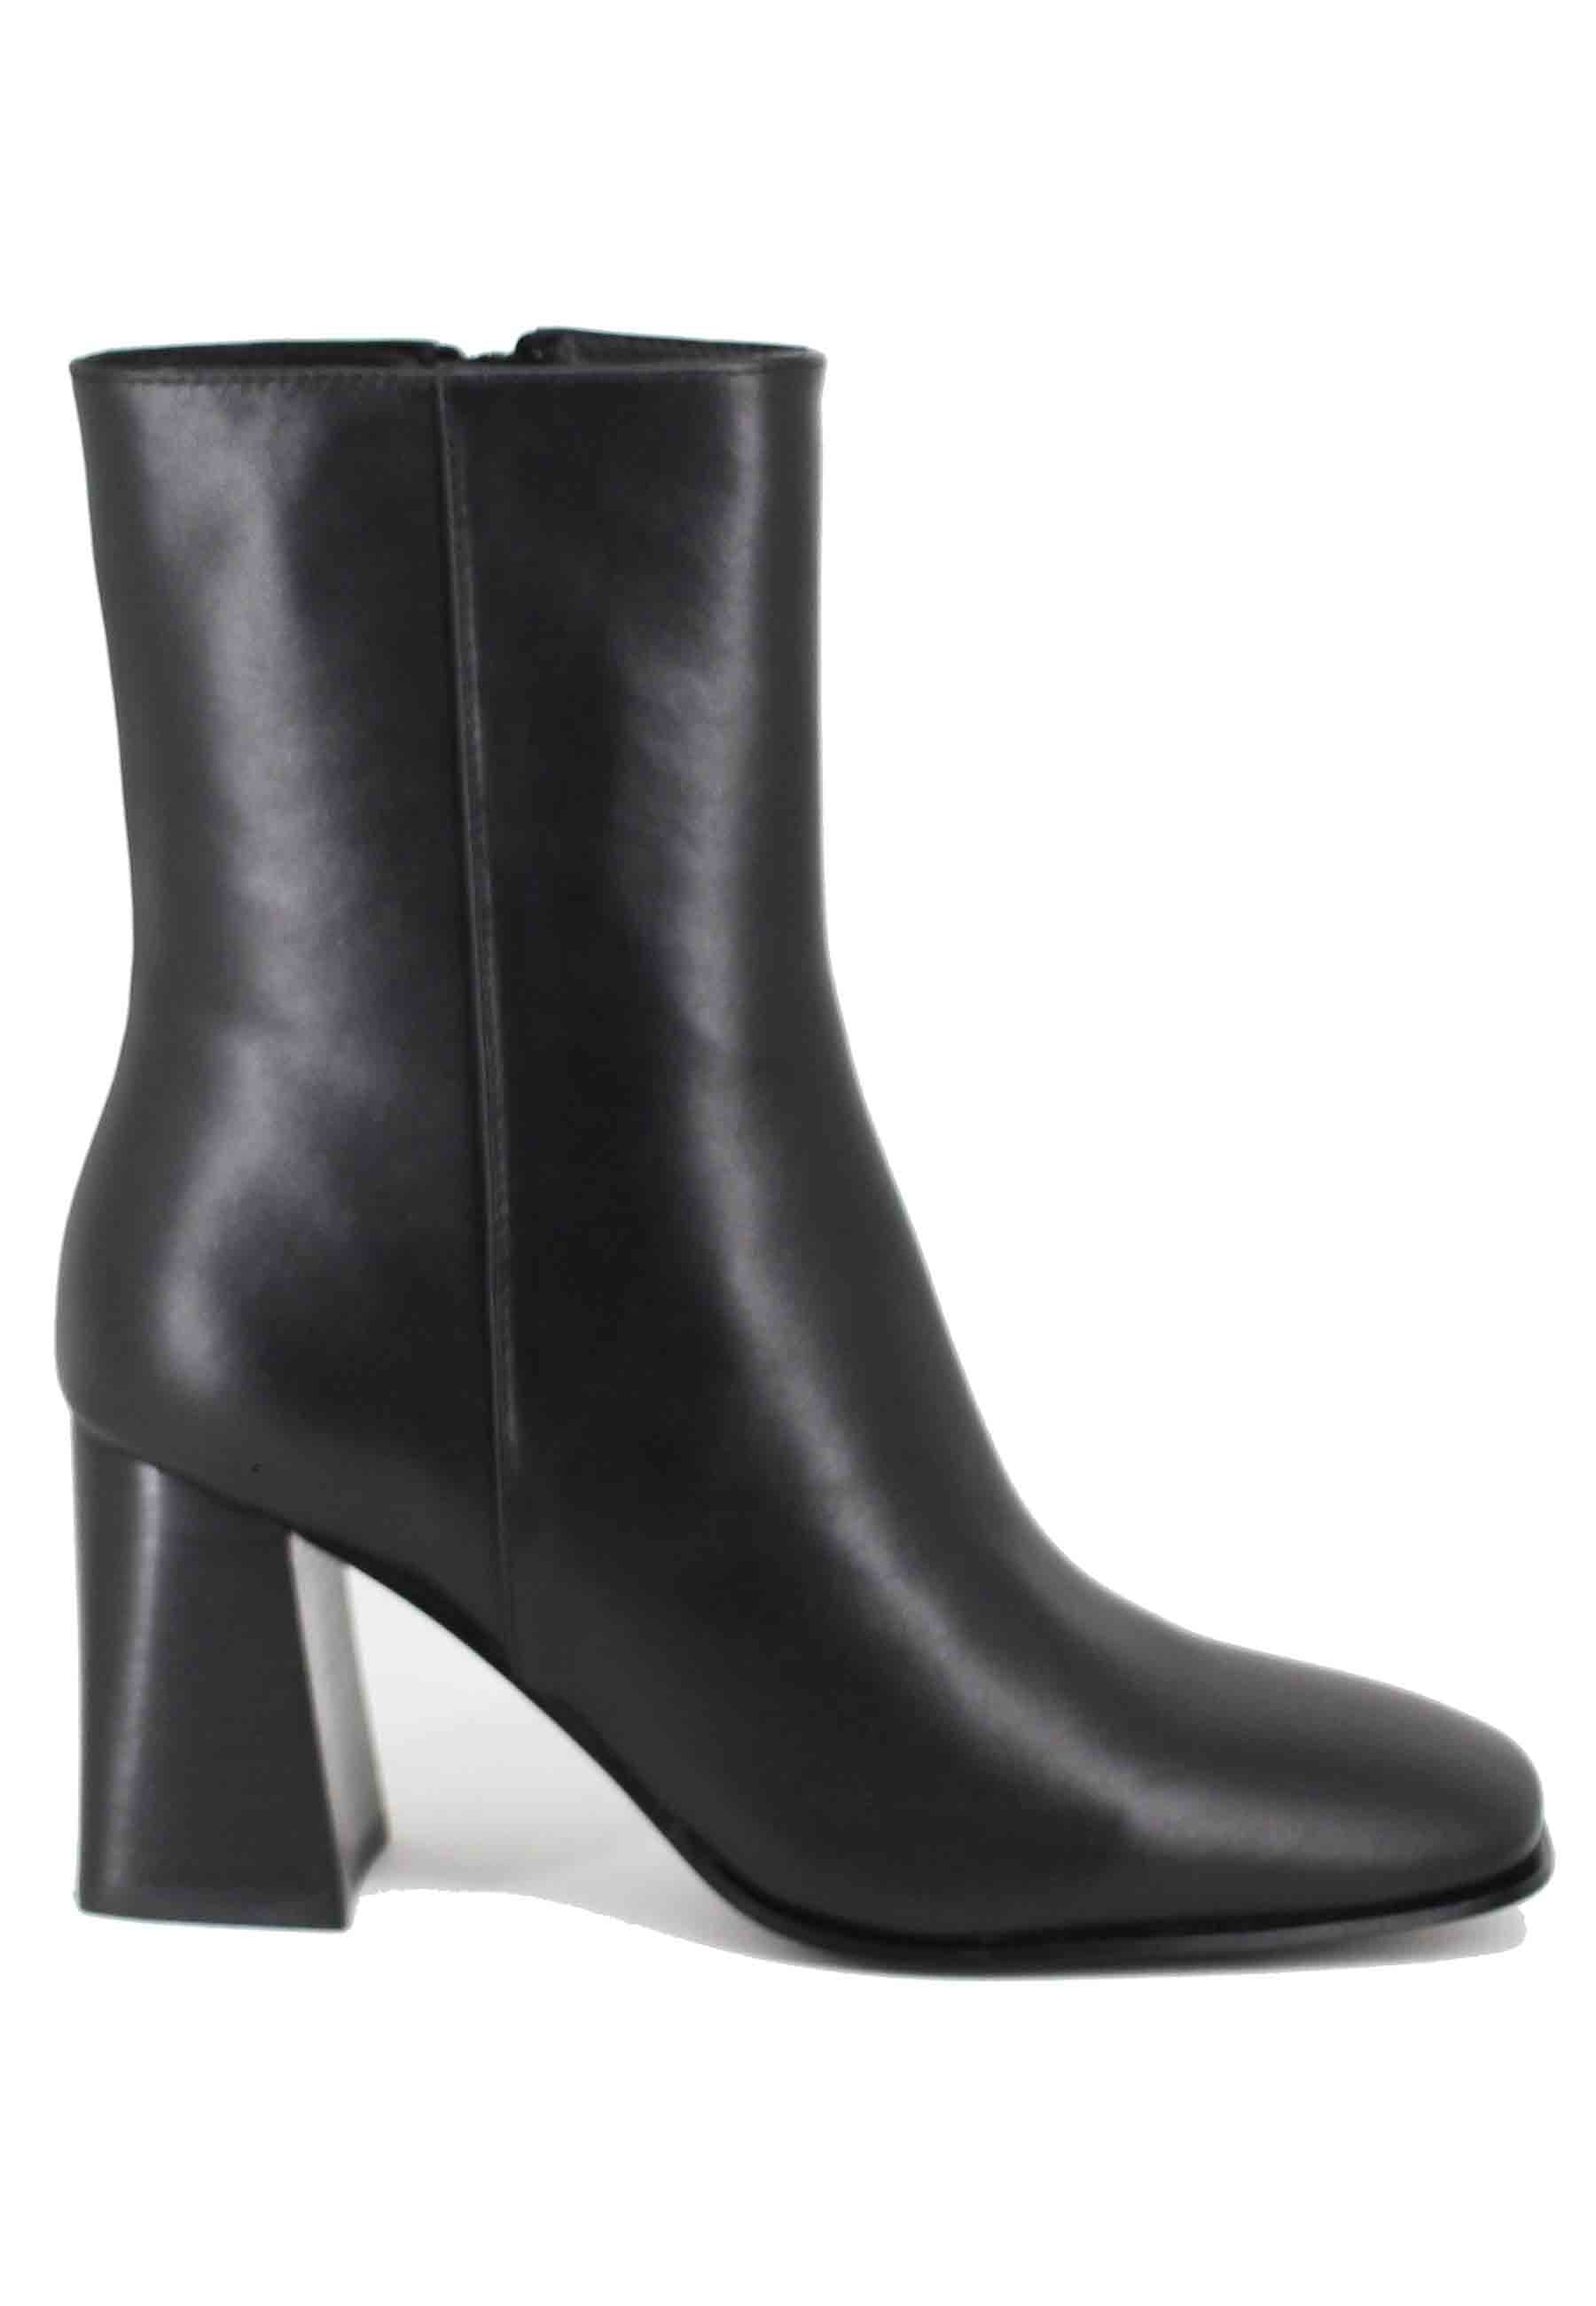 Women's black leather ankle boots with high heel and square toe